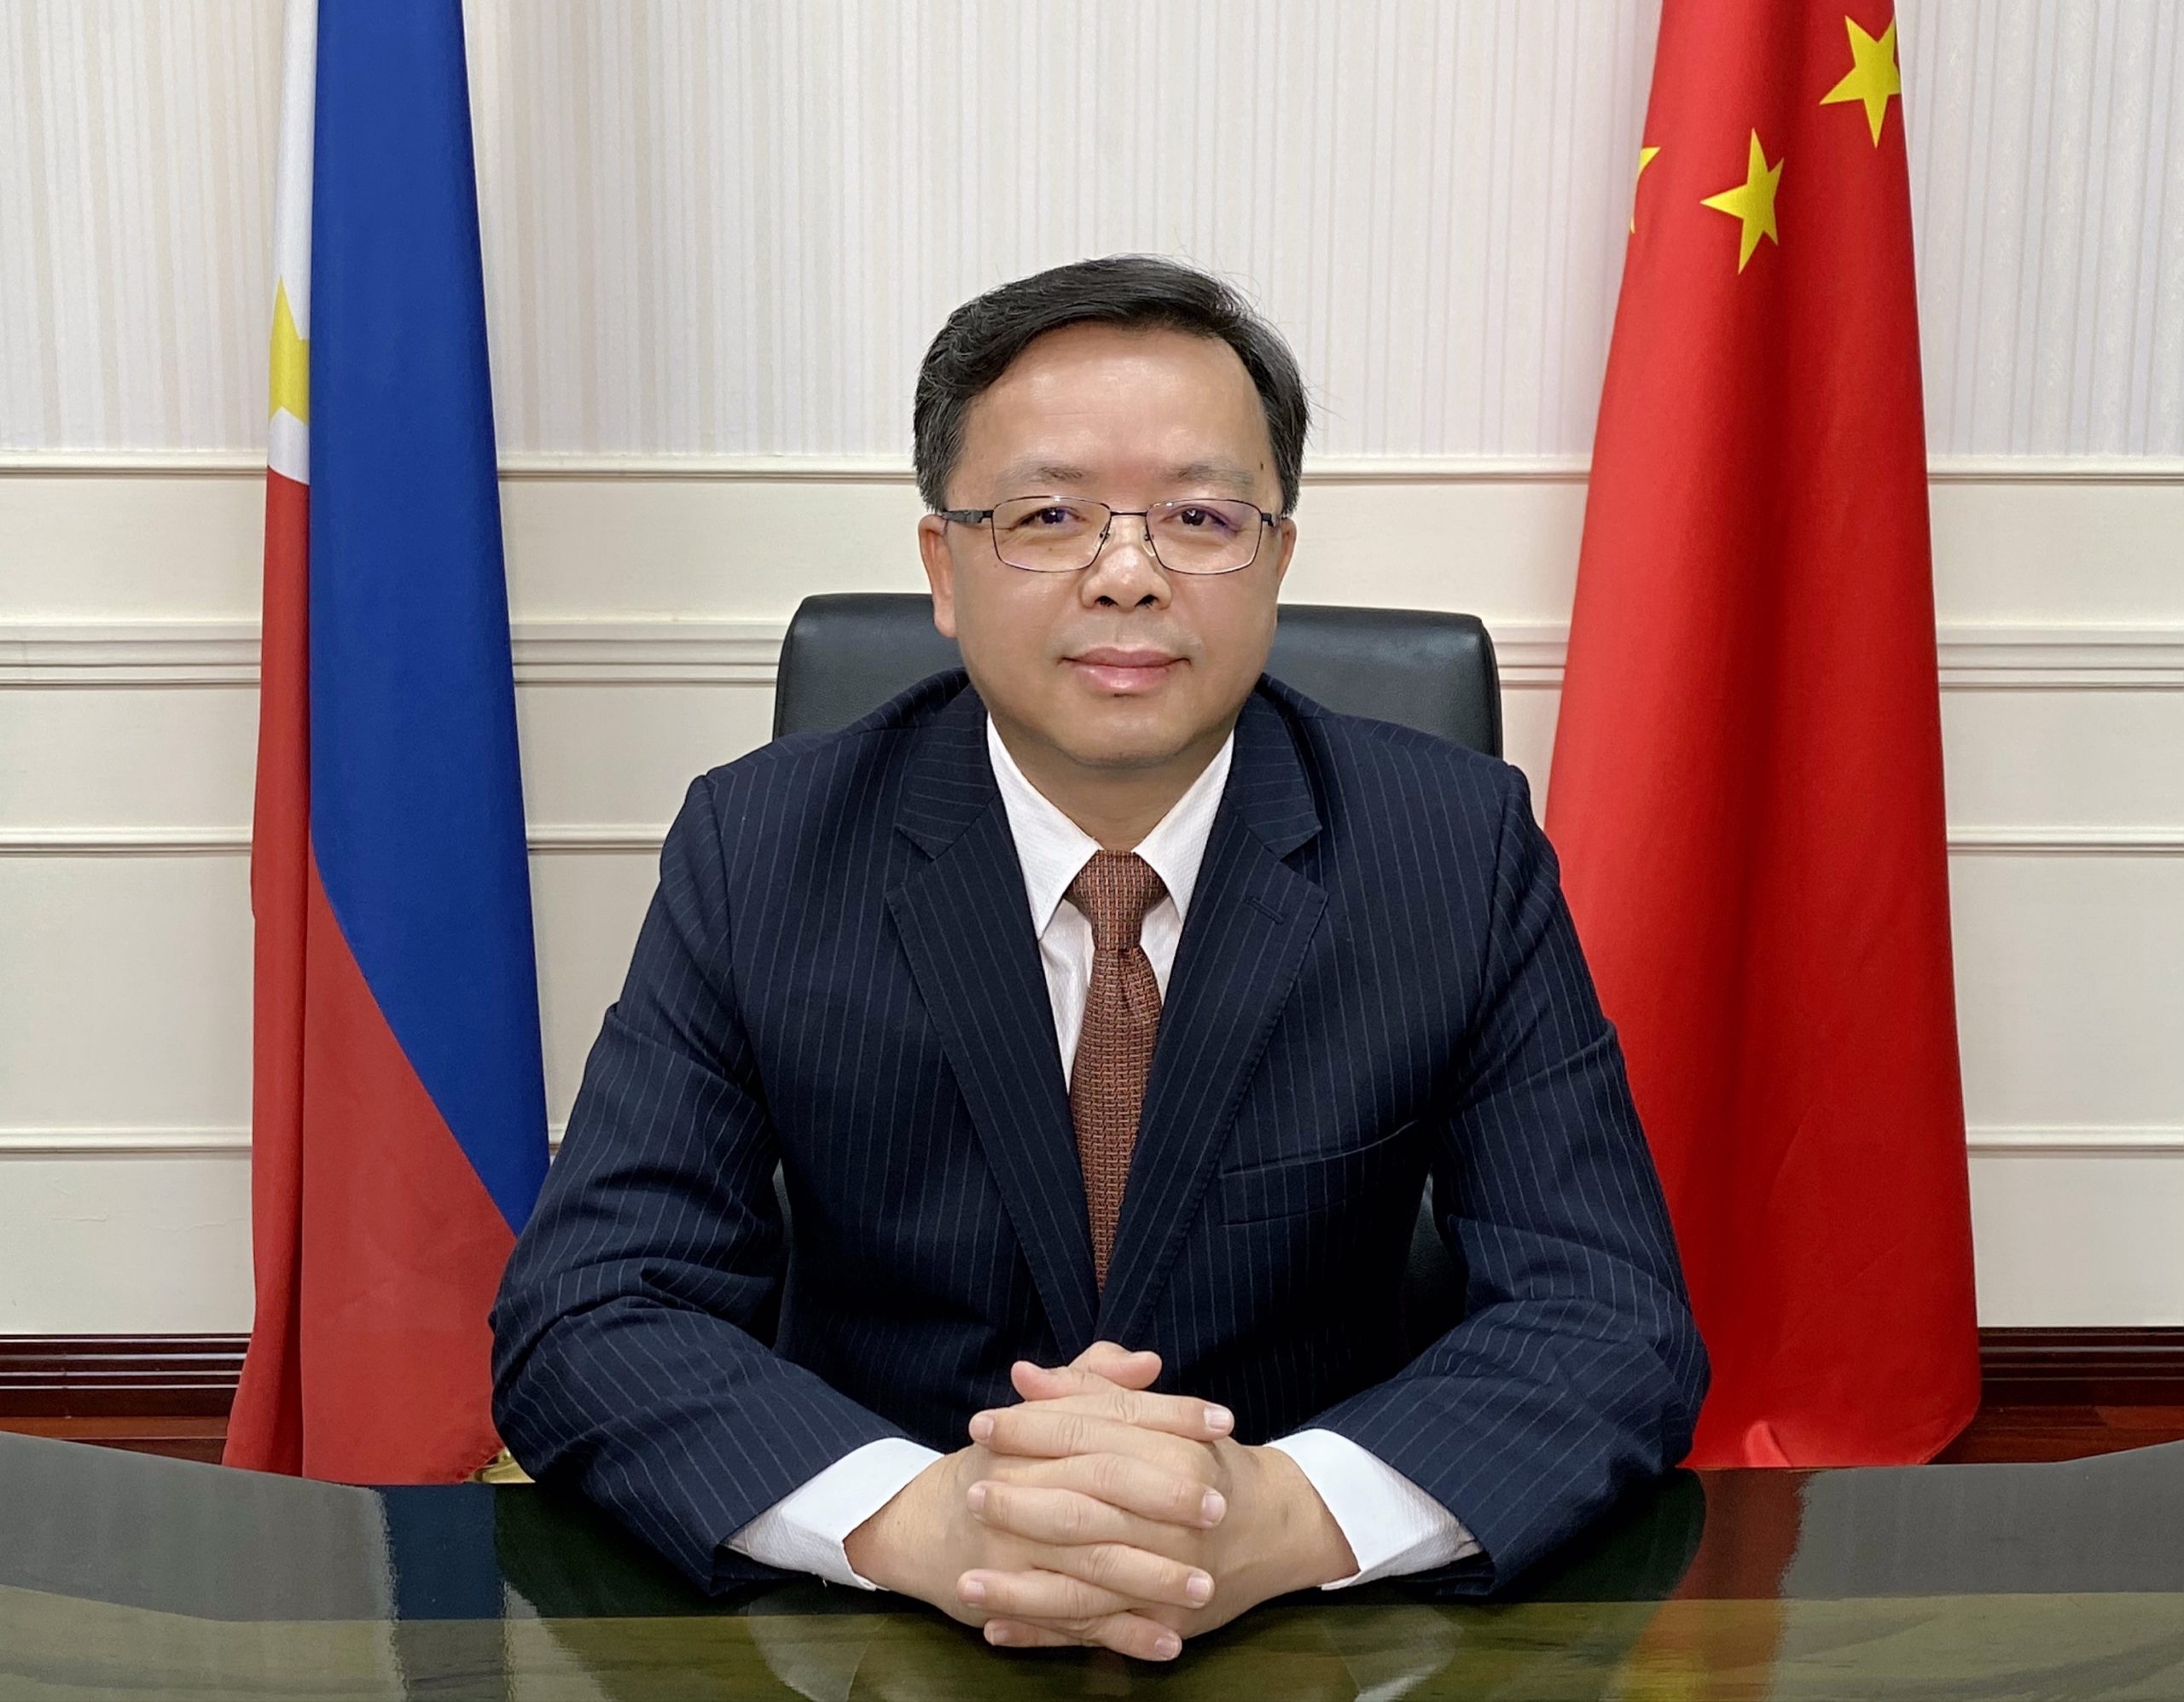 Chinese Ambassador to the Philippines Huang Xilian south china sea peace